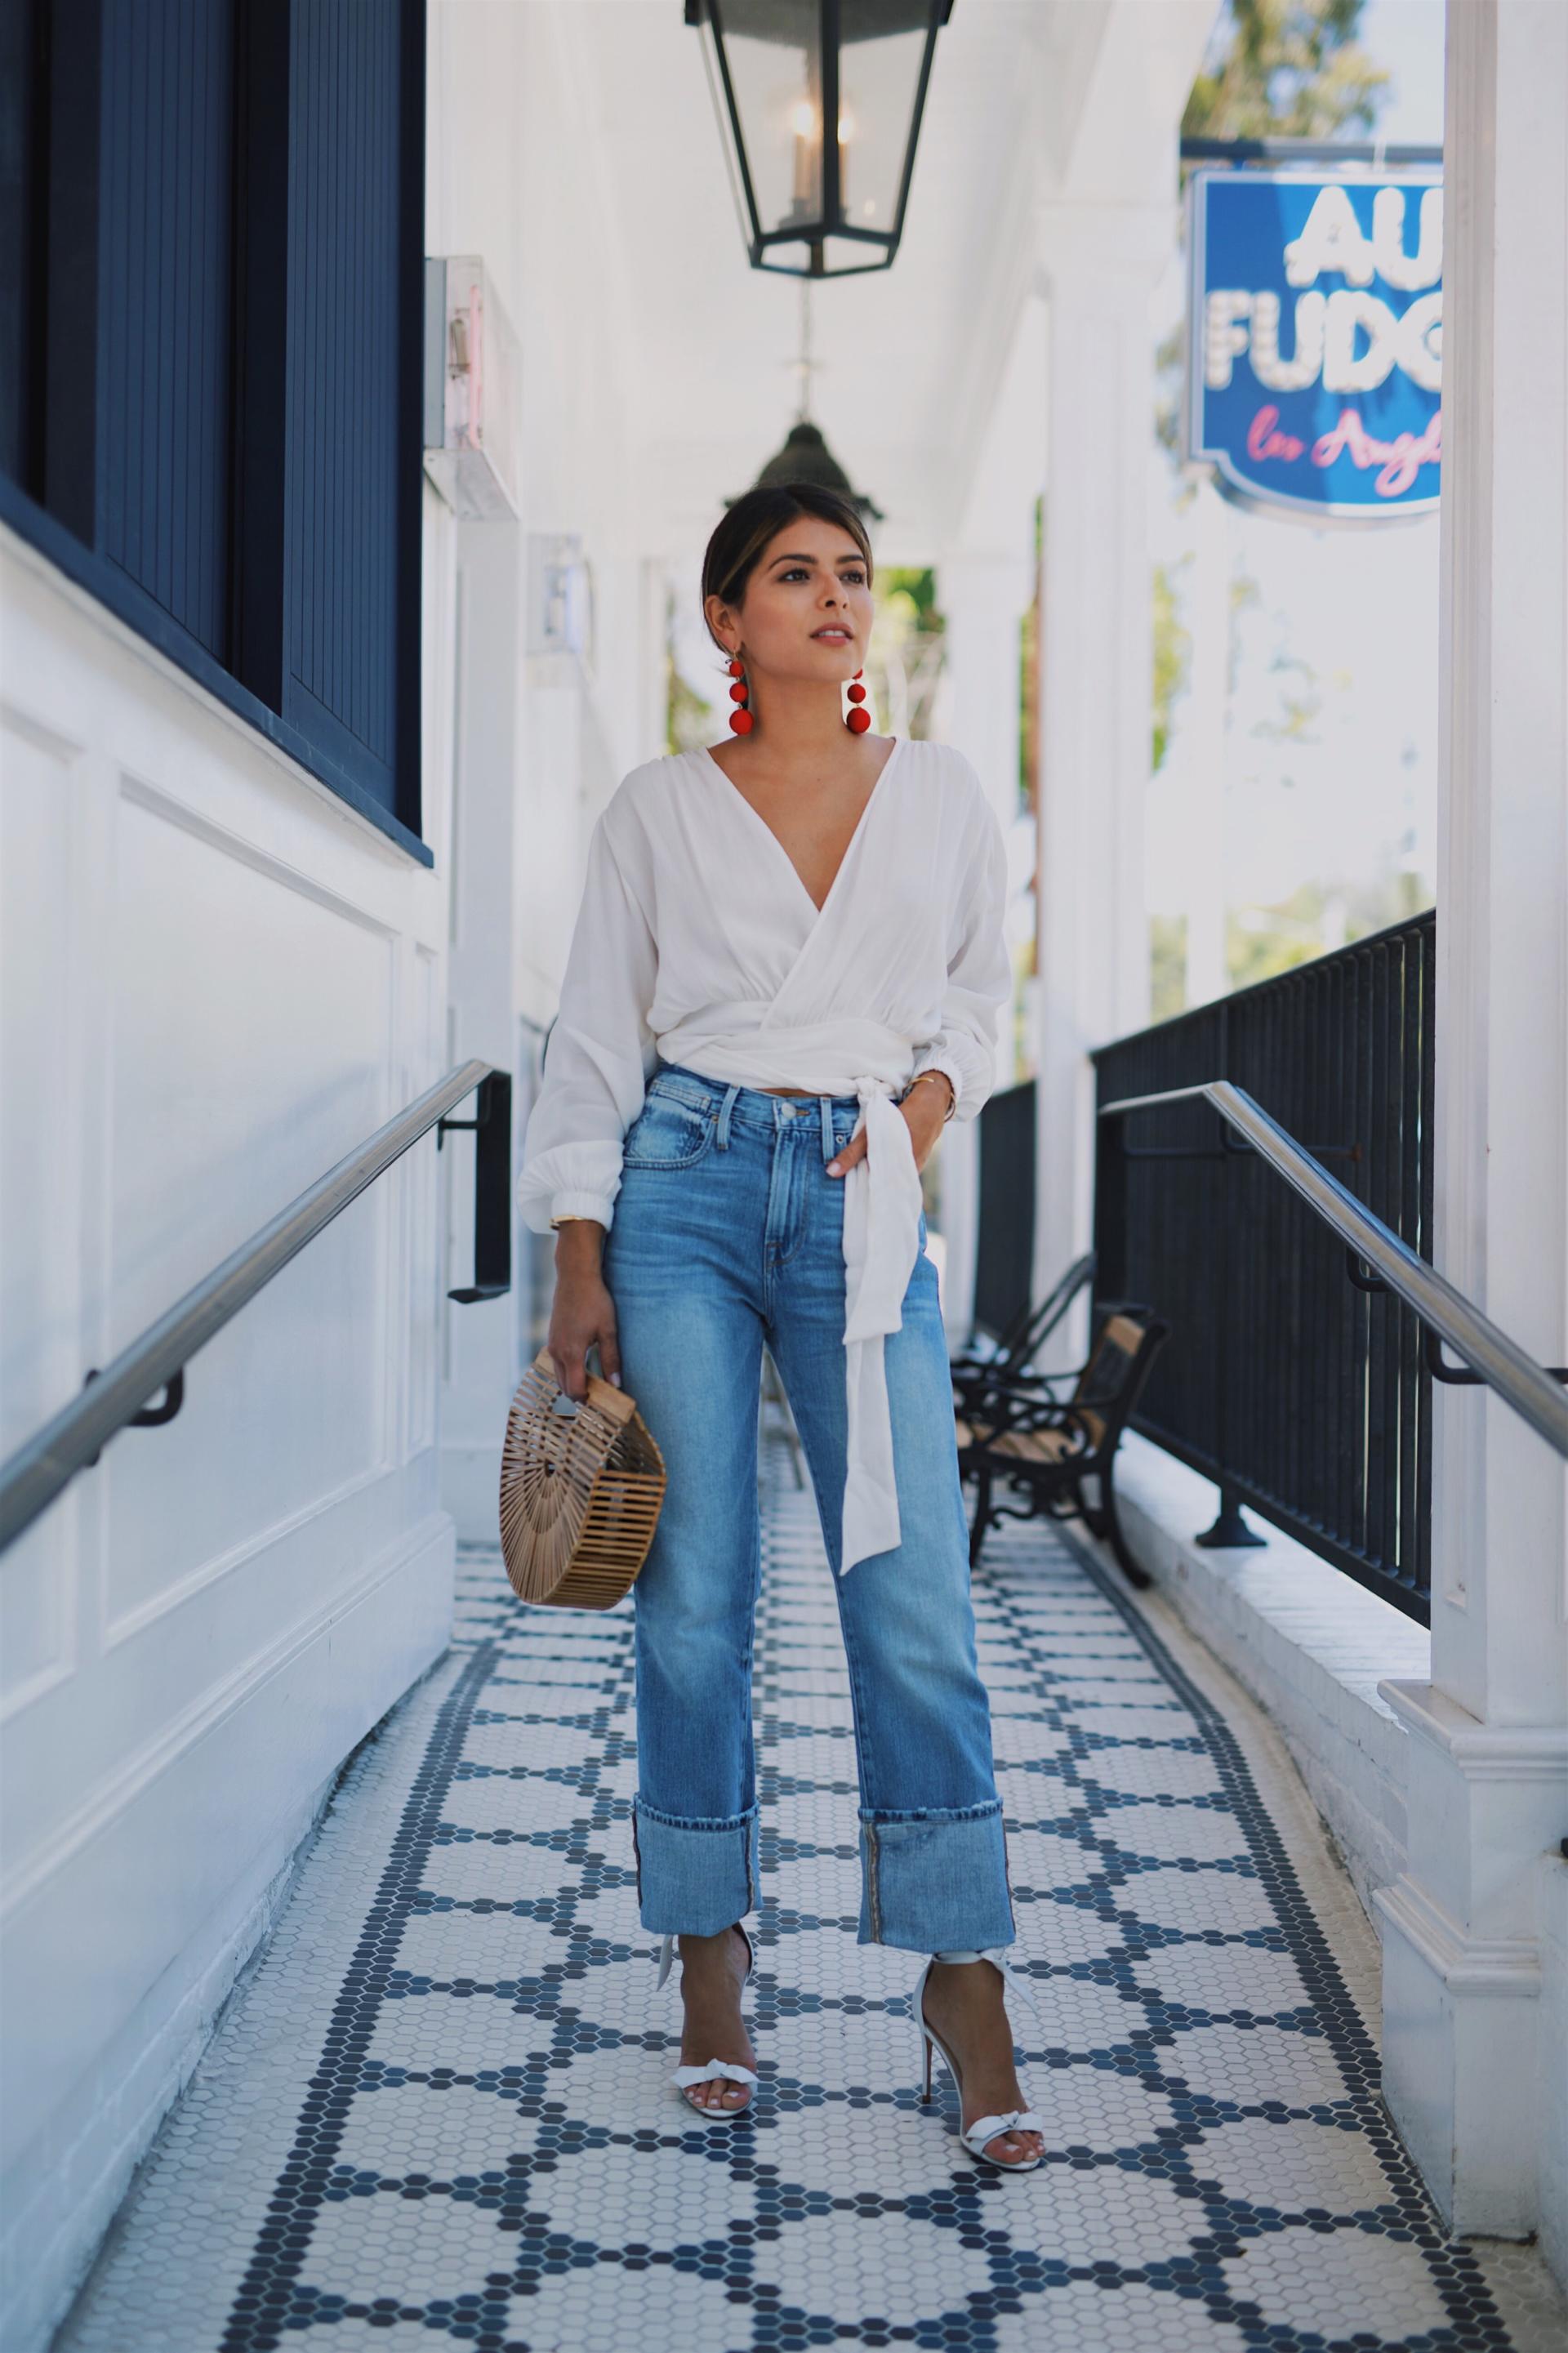 How to style denim in July: Cuffed jeans // The Girl From Panama